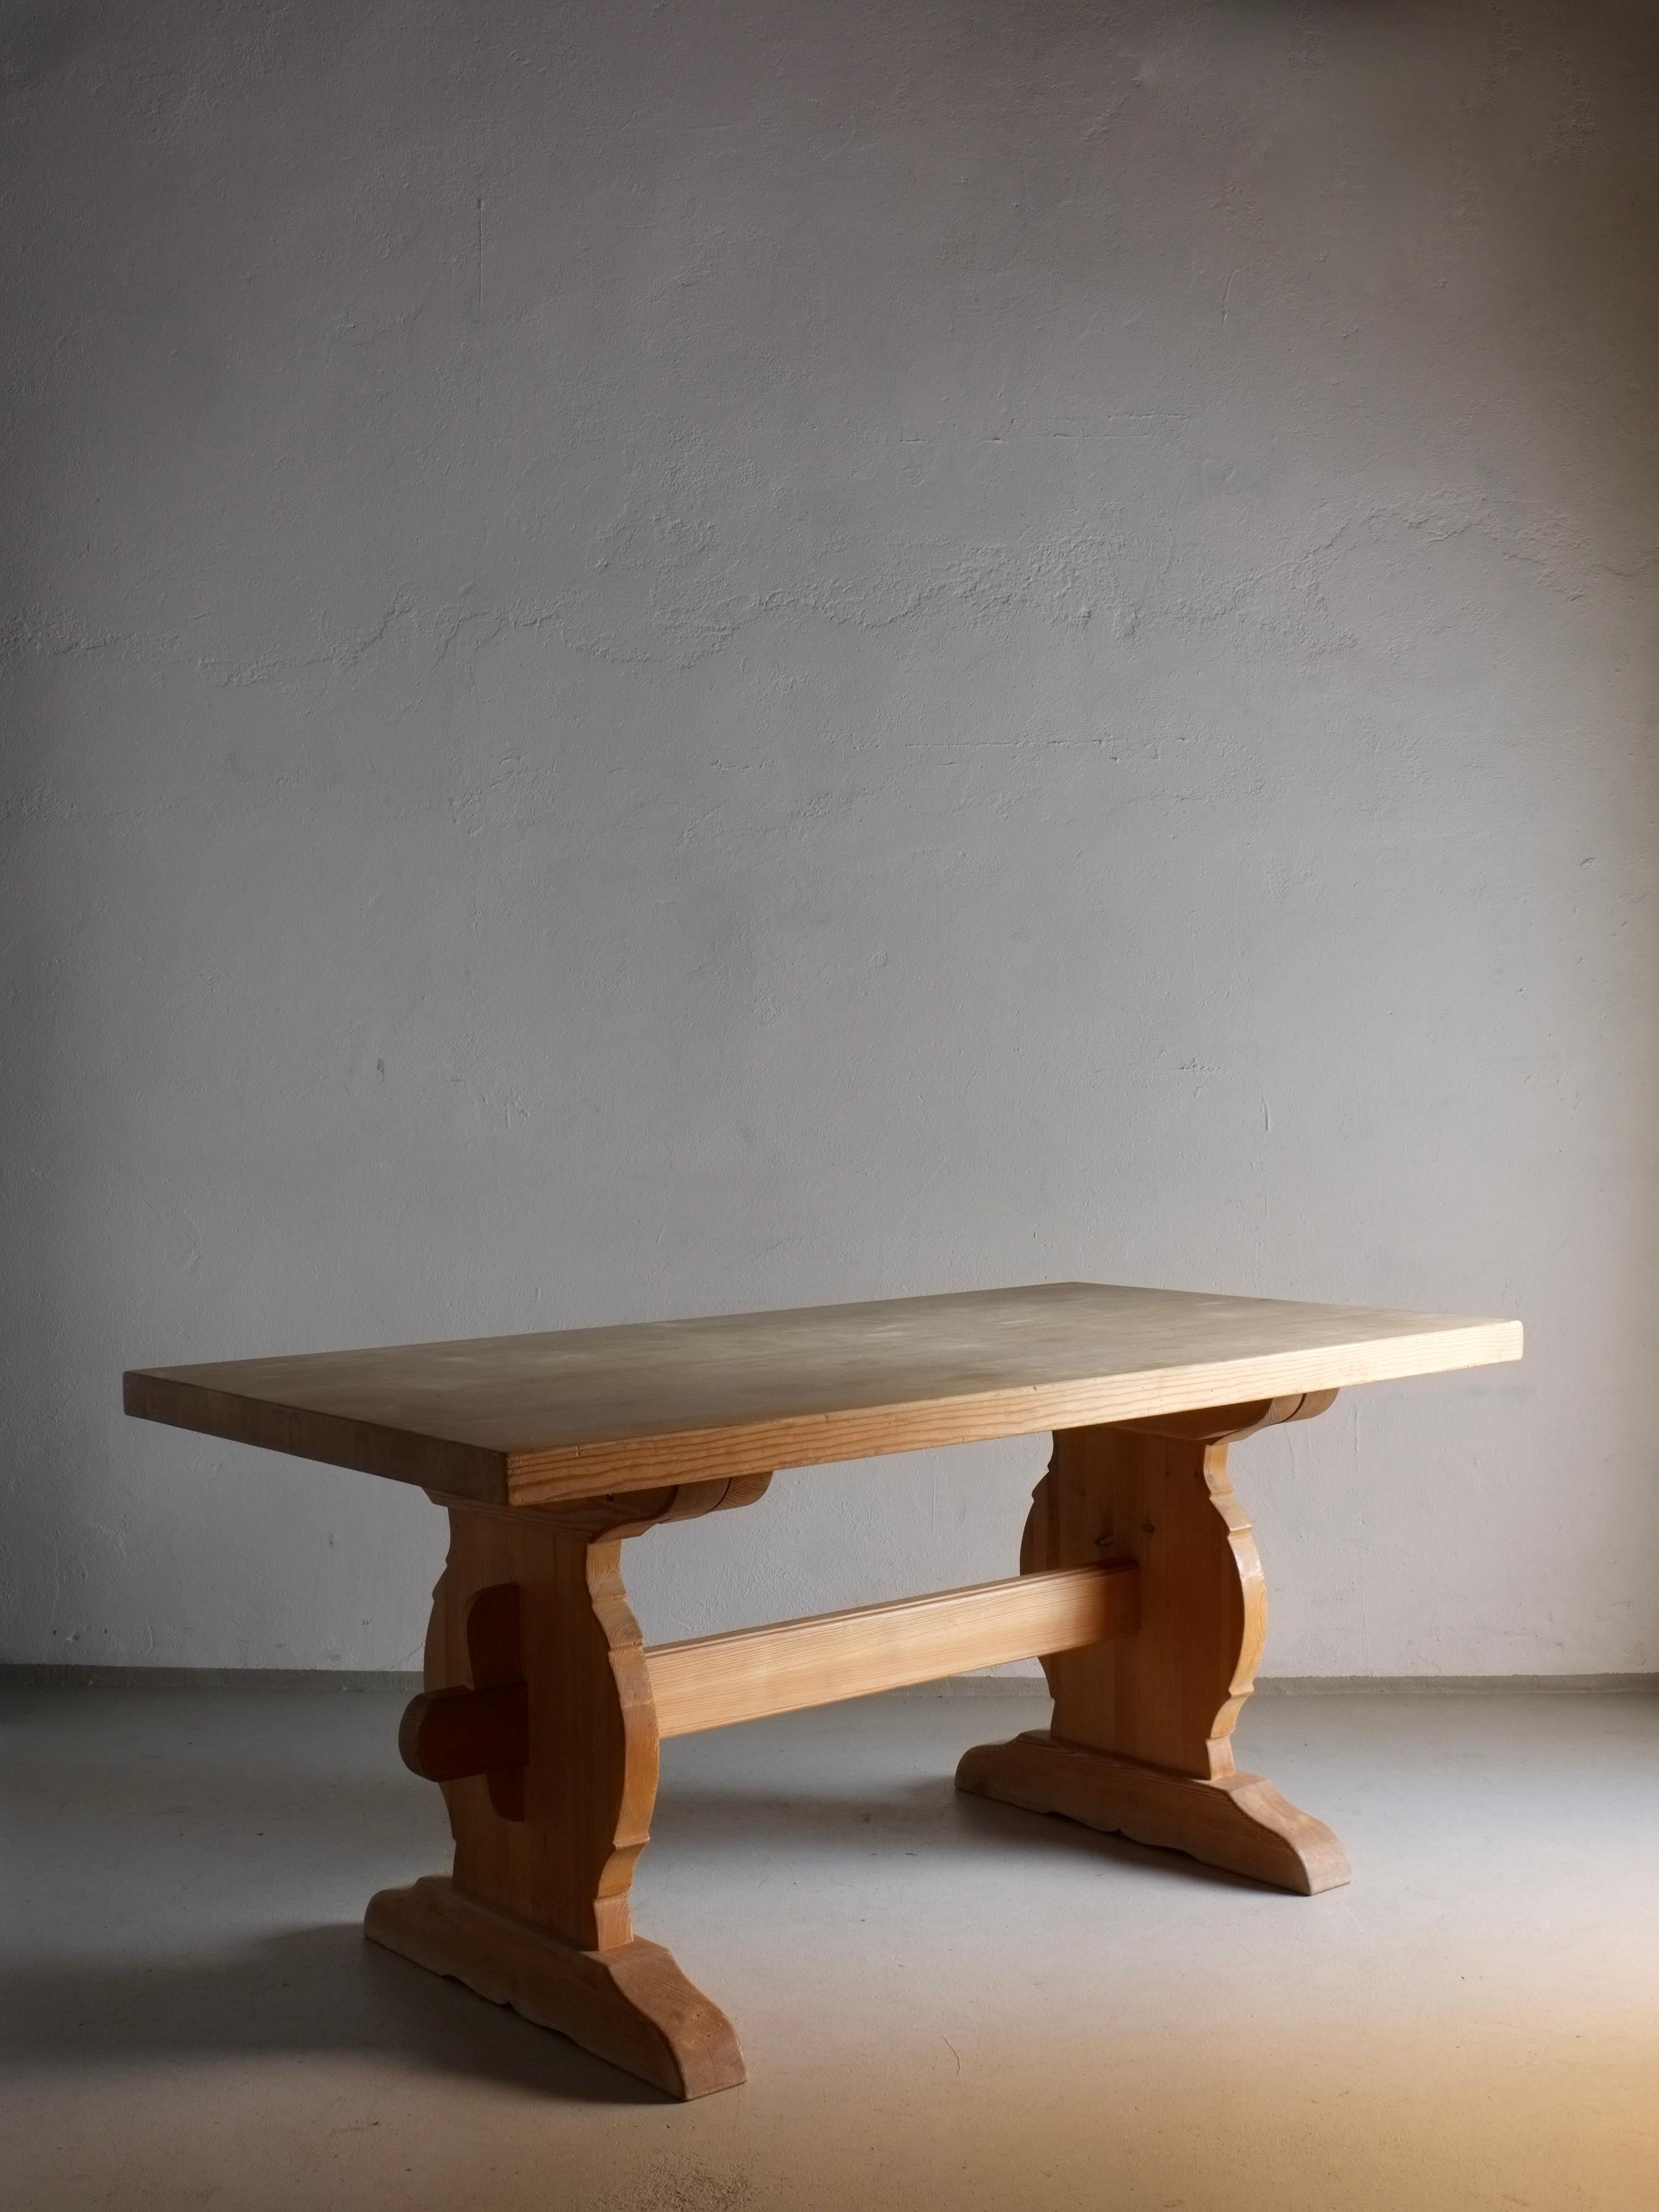 Rustic trestle dining table made of solid pine wood with a 5 cm tabletop. Goes best with bench/stool seating because of the space lack between the legs. The table may be fully dissembled for easy transportation or storage.

Additional